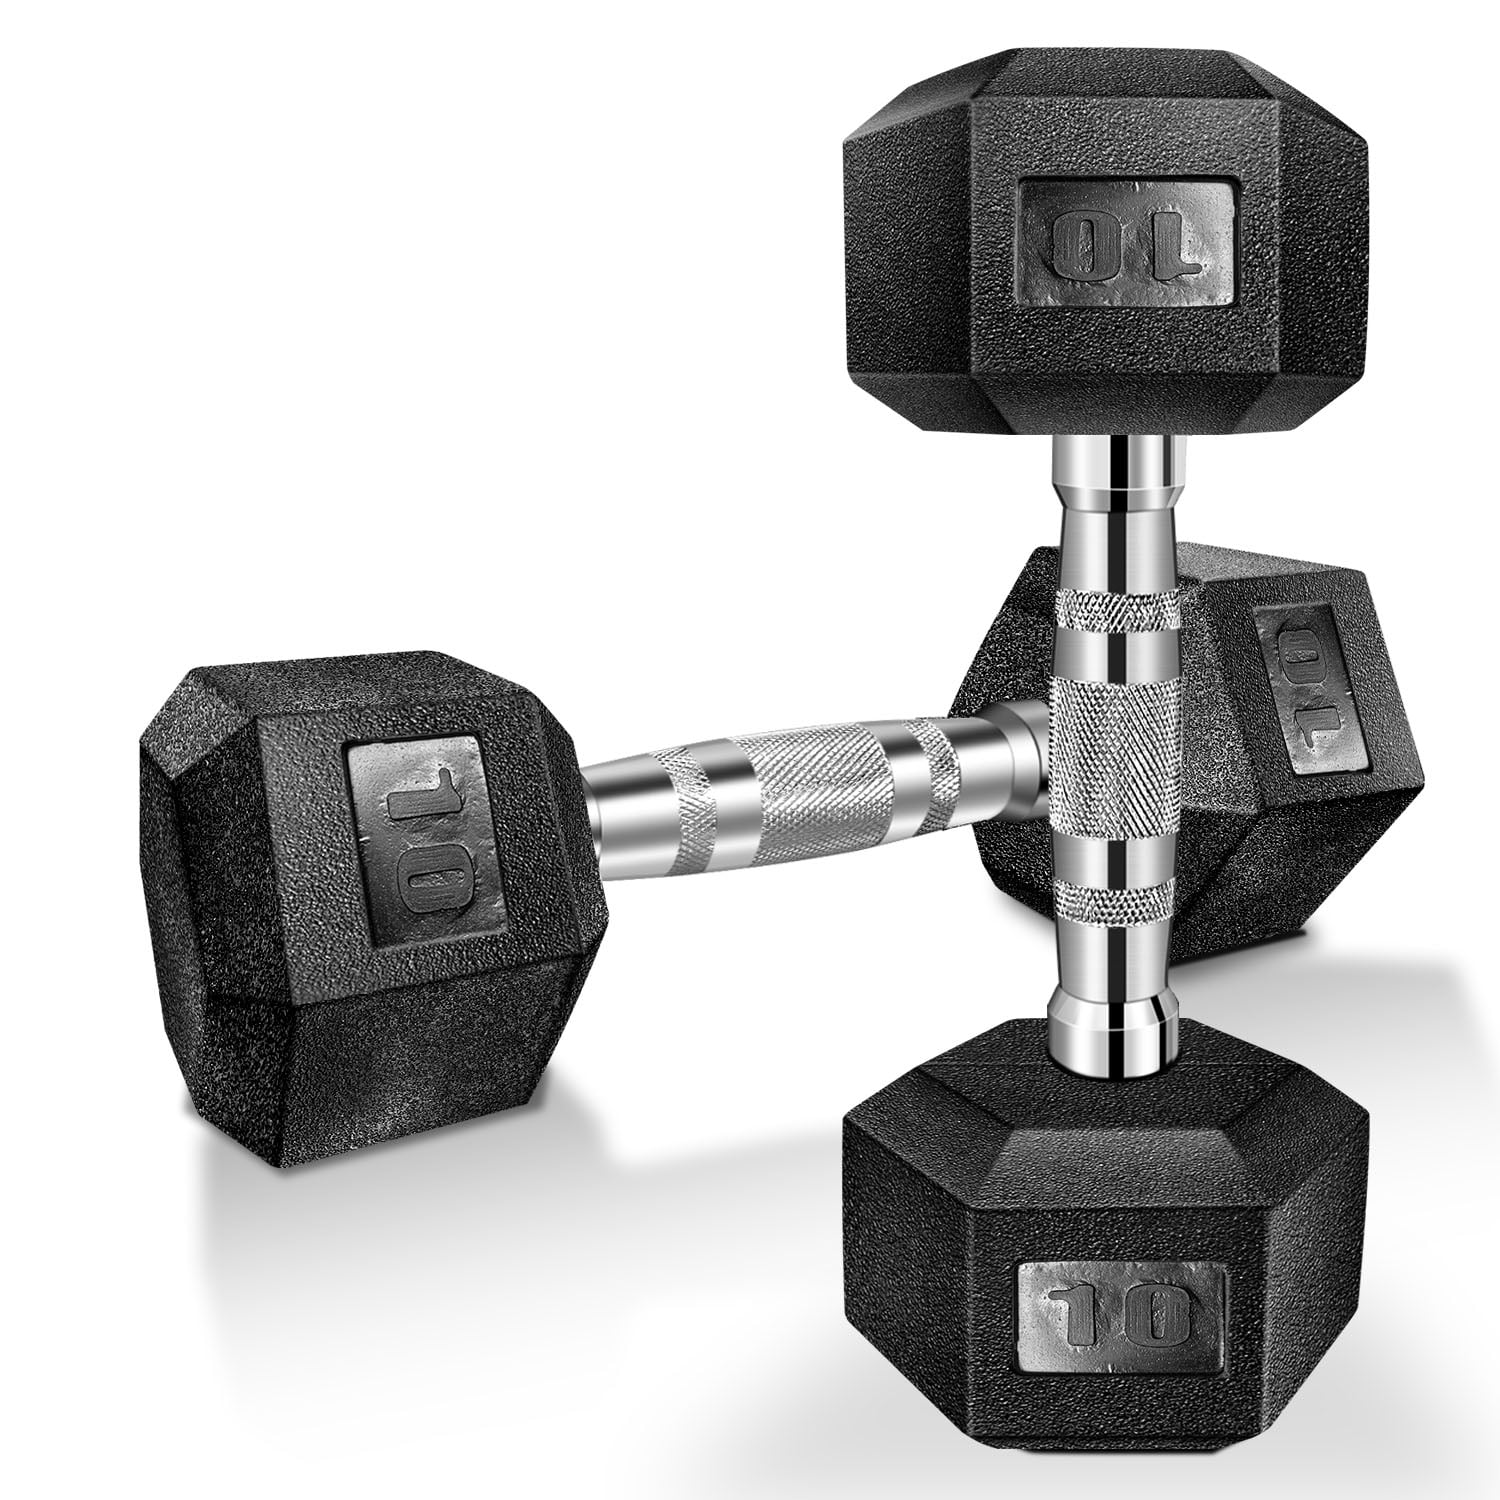 Dumbbell Weights Dumbbells Sets Dumbbell in Pairs or Singles 10Lbs/ 20Lbs/ 30Lbs Hex Rubber Dumbbell with Metal Handles Heavy Dumbbell Set for Muscle Training 